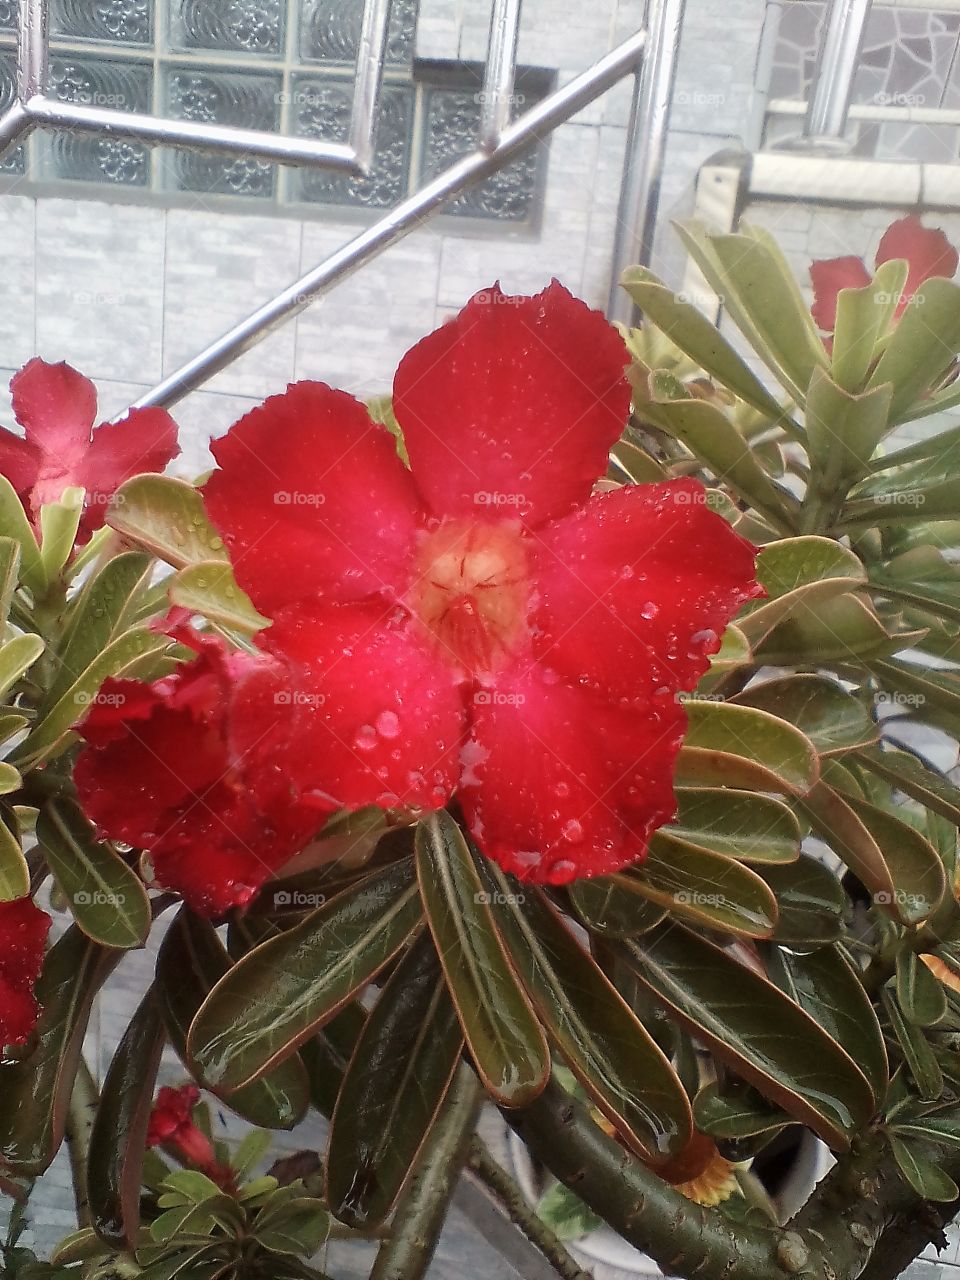 Japanese red frangipani flowers are soaking wet with rain in Jakarta